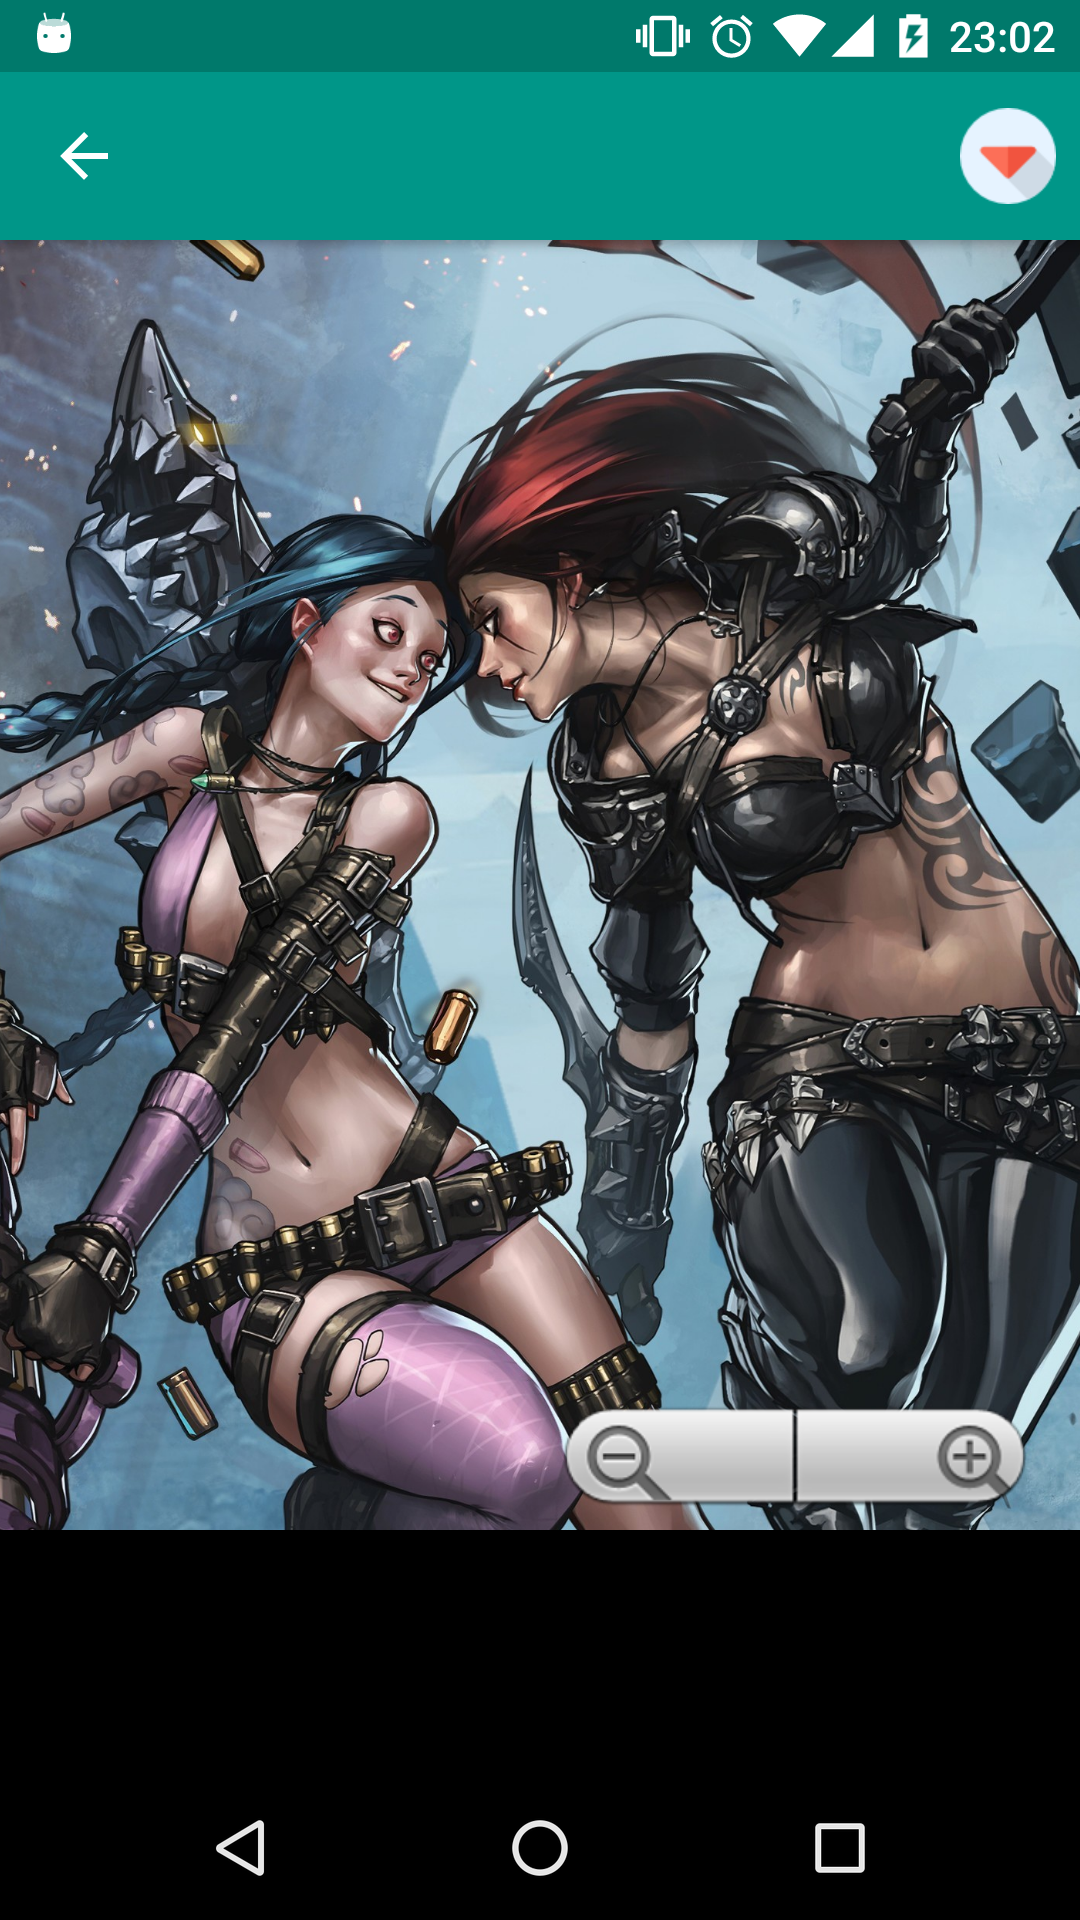 League of Legends wallpapers backgrounds,gallery,porn,puzzles,download,harem,henti,sexy,league,photos,apk,legends,anime,erotica,and,comix,henatai,hentai,wallpapers,apps,ios,image,pic,app,video,panties,game,pics